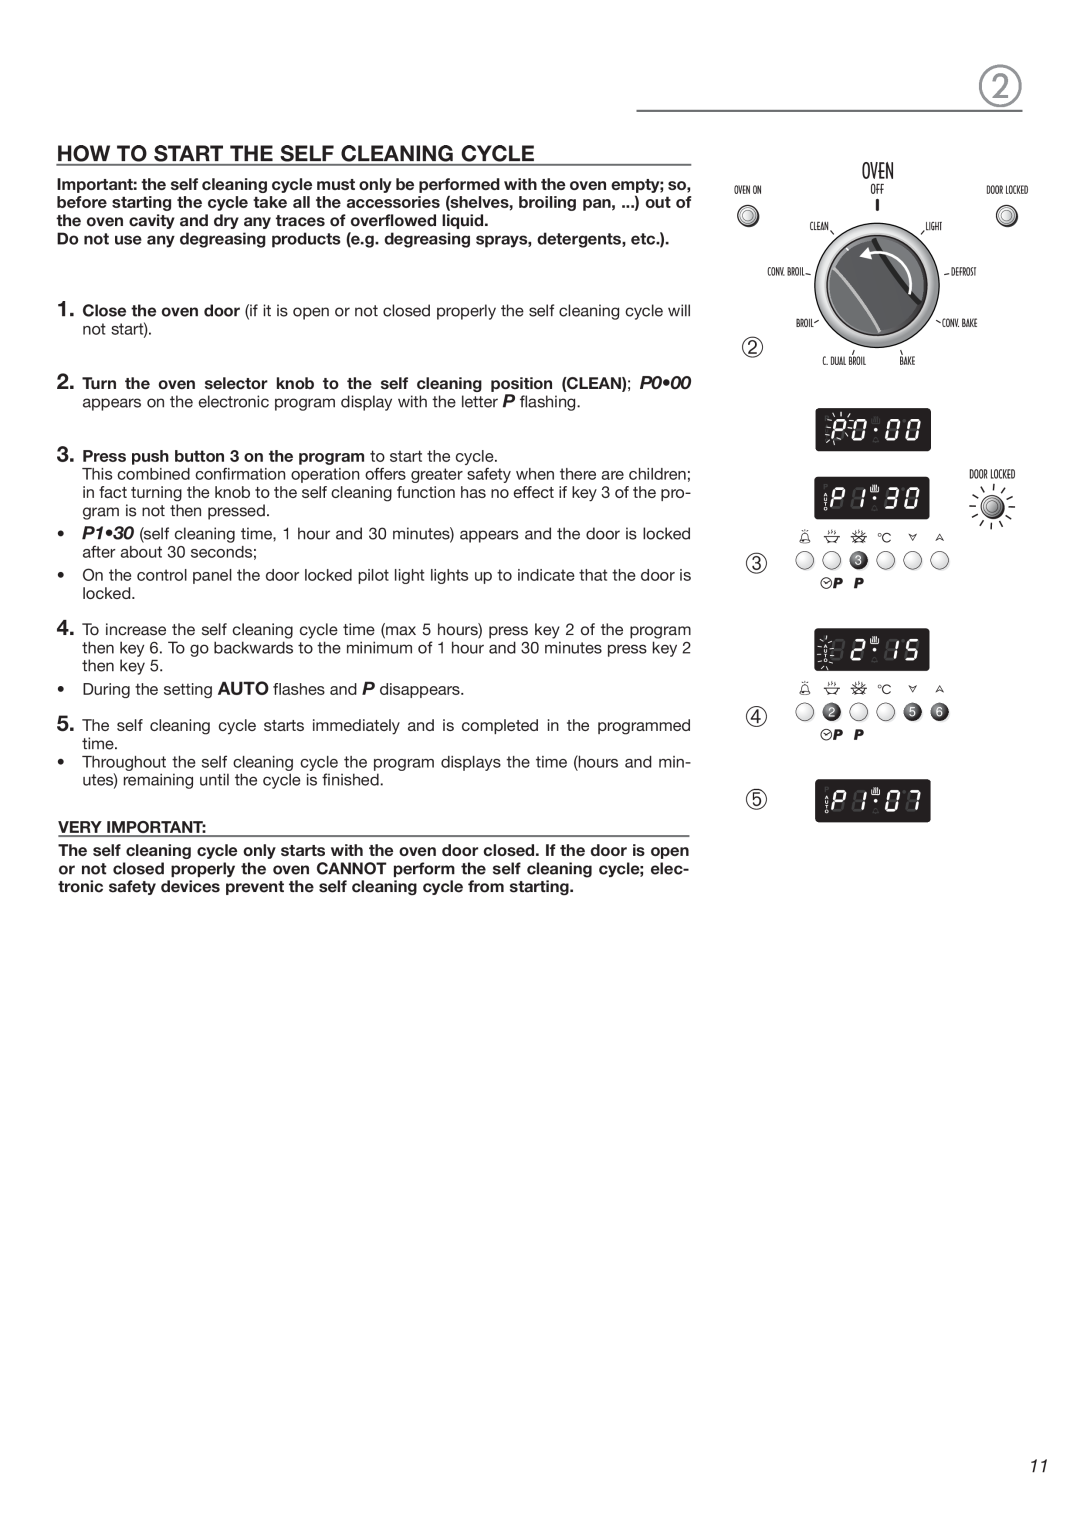 DeLonghi 24 E, 24 SS warranty ➁ ➂ ➃ ➄, How To Start The Self Cleaning Cycle 